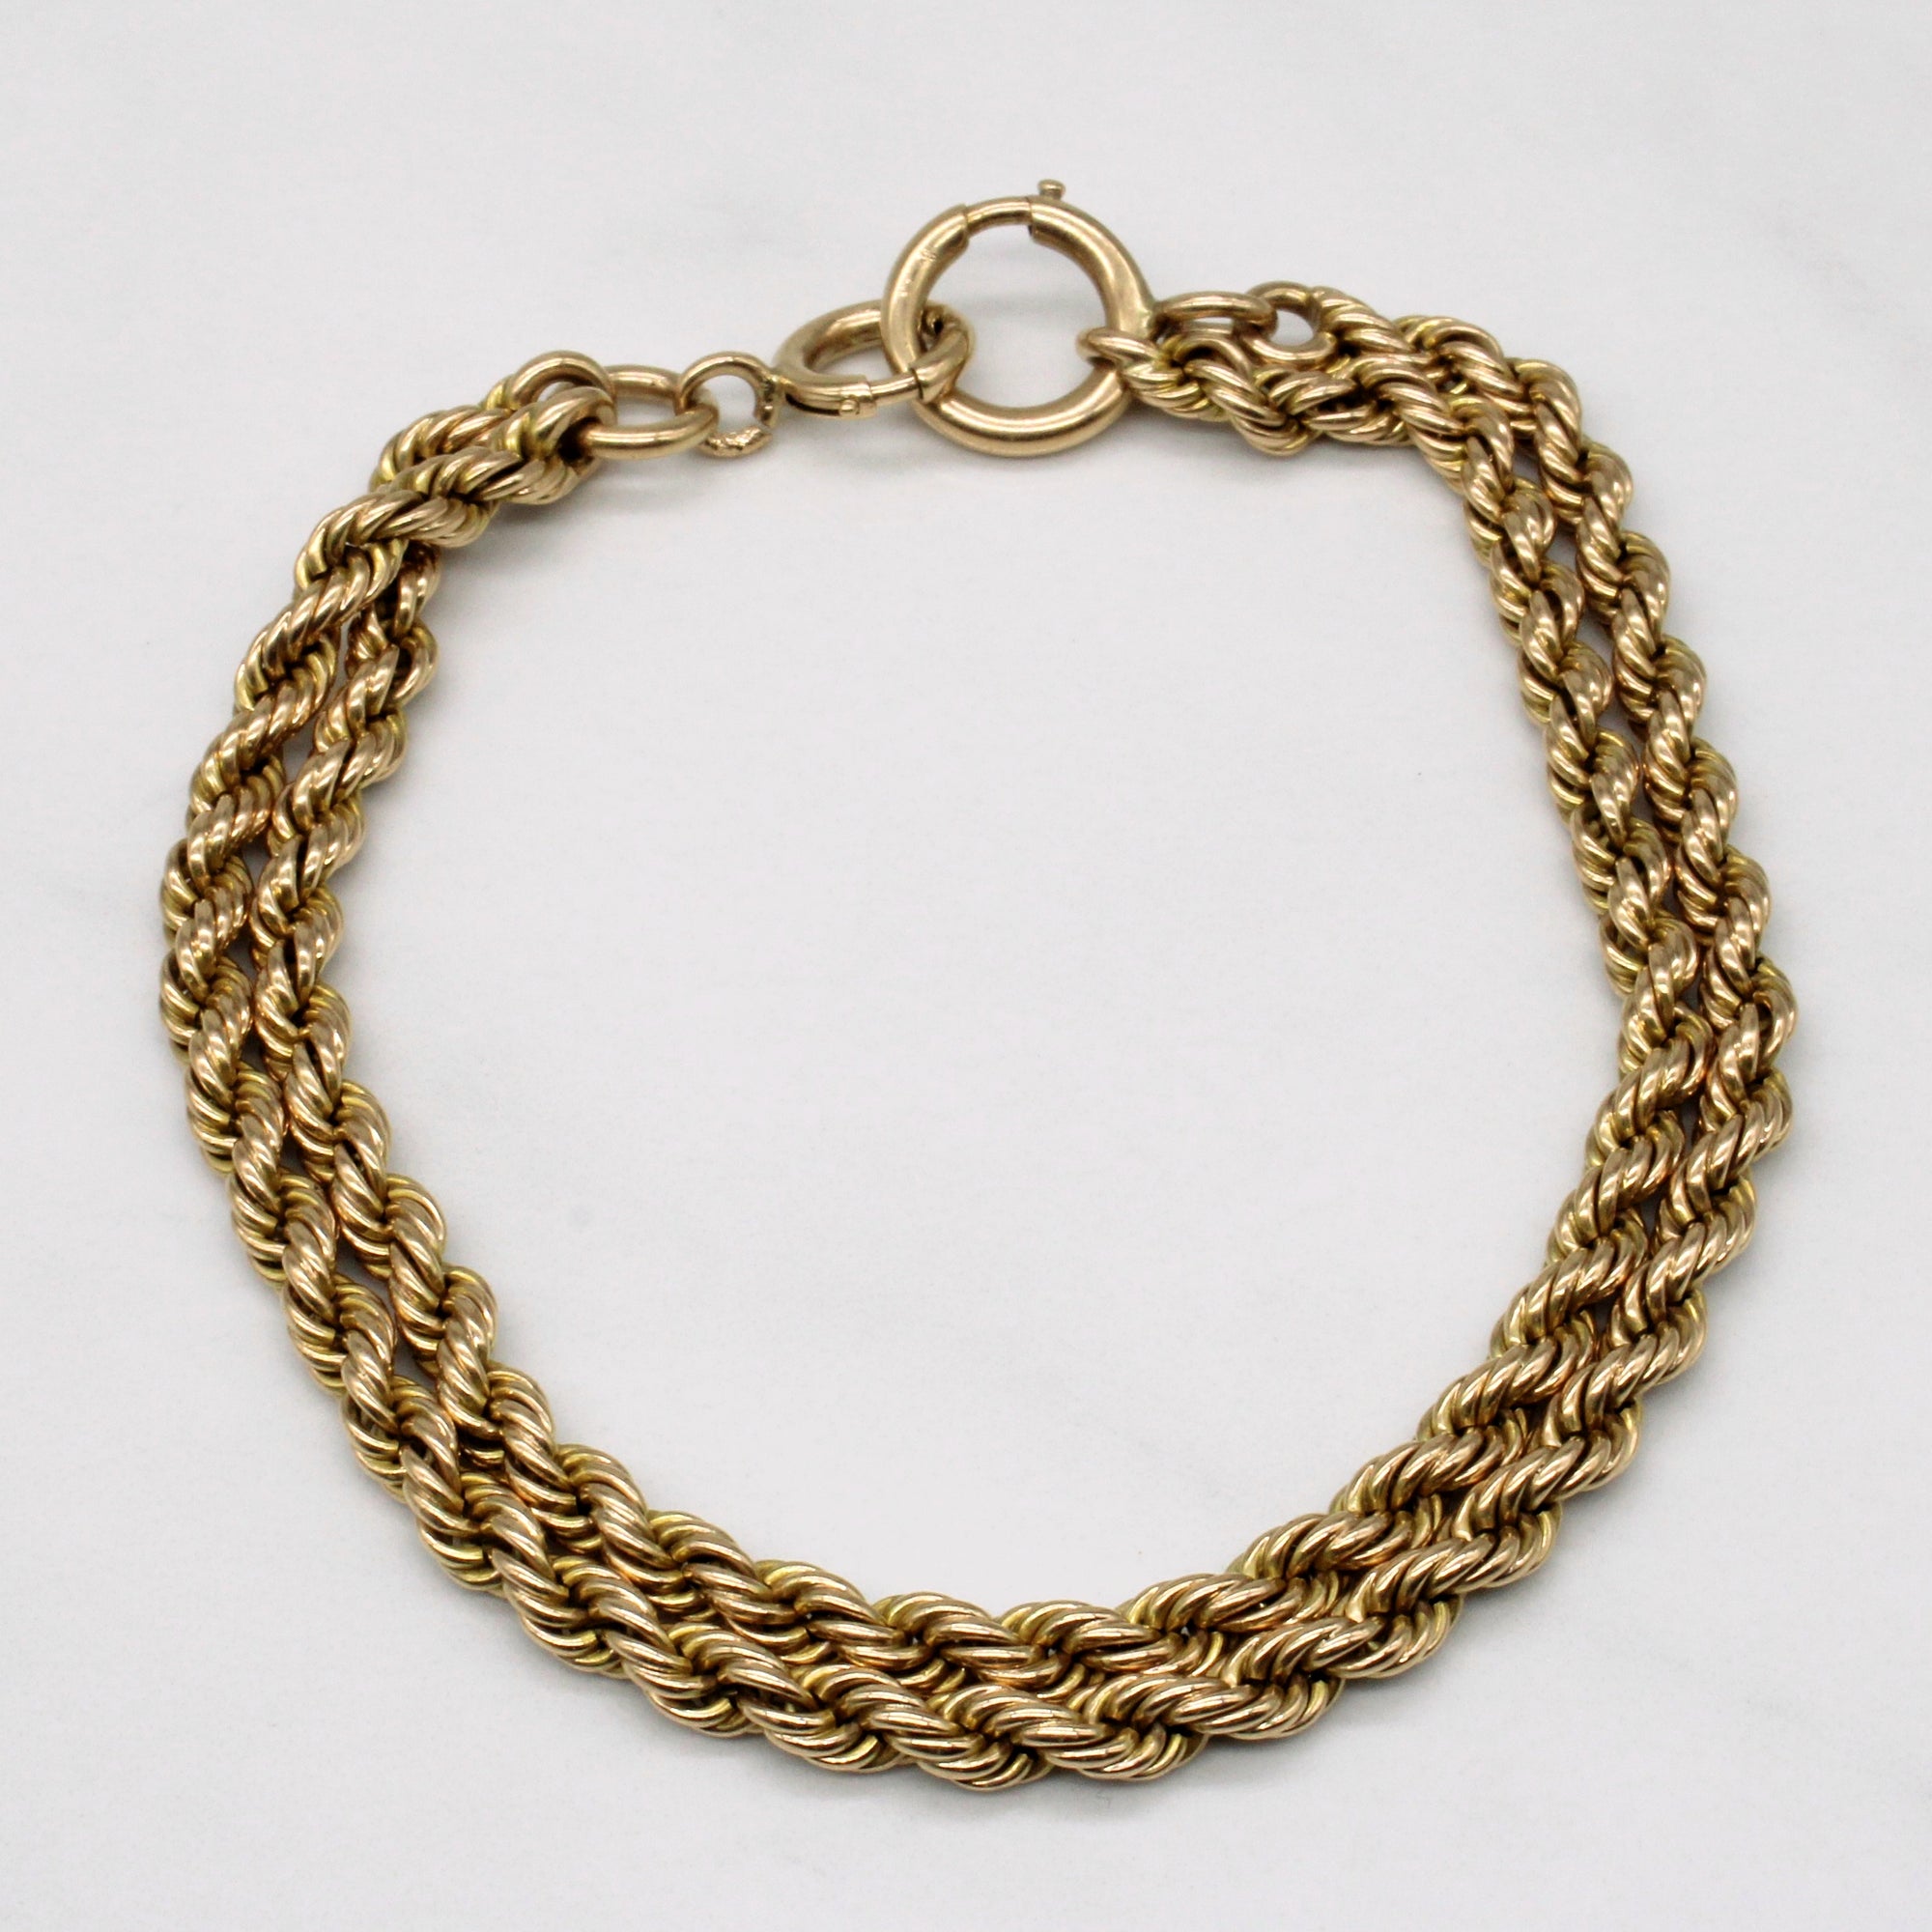 10k Yellow Gold Tiered Rope Chain Bracelet | 8.25